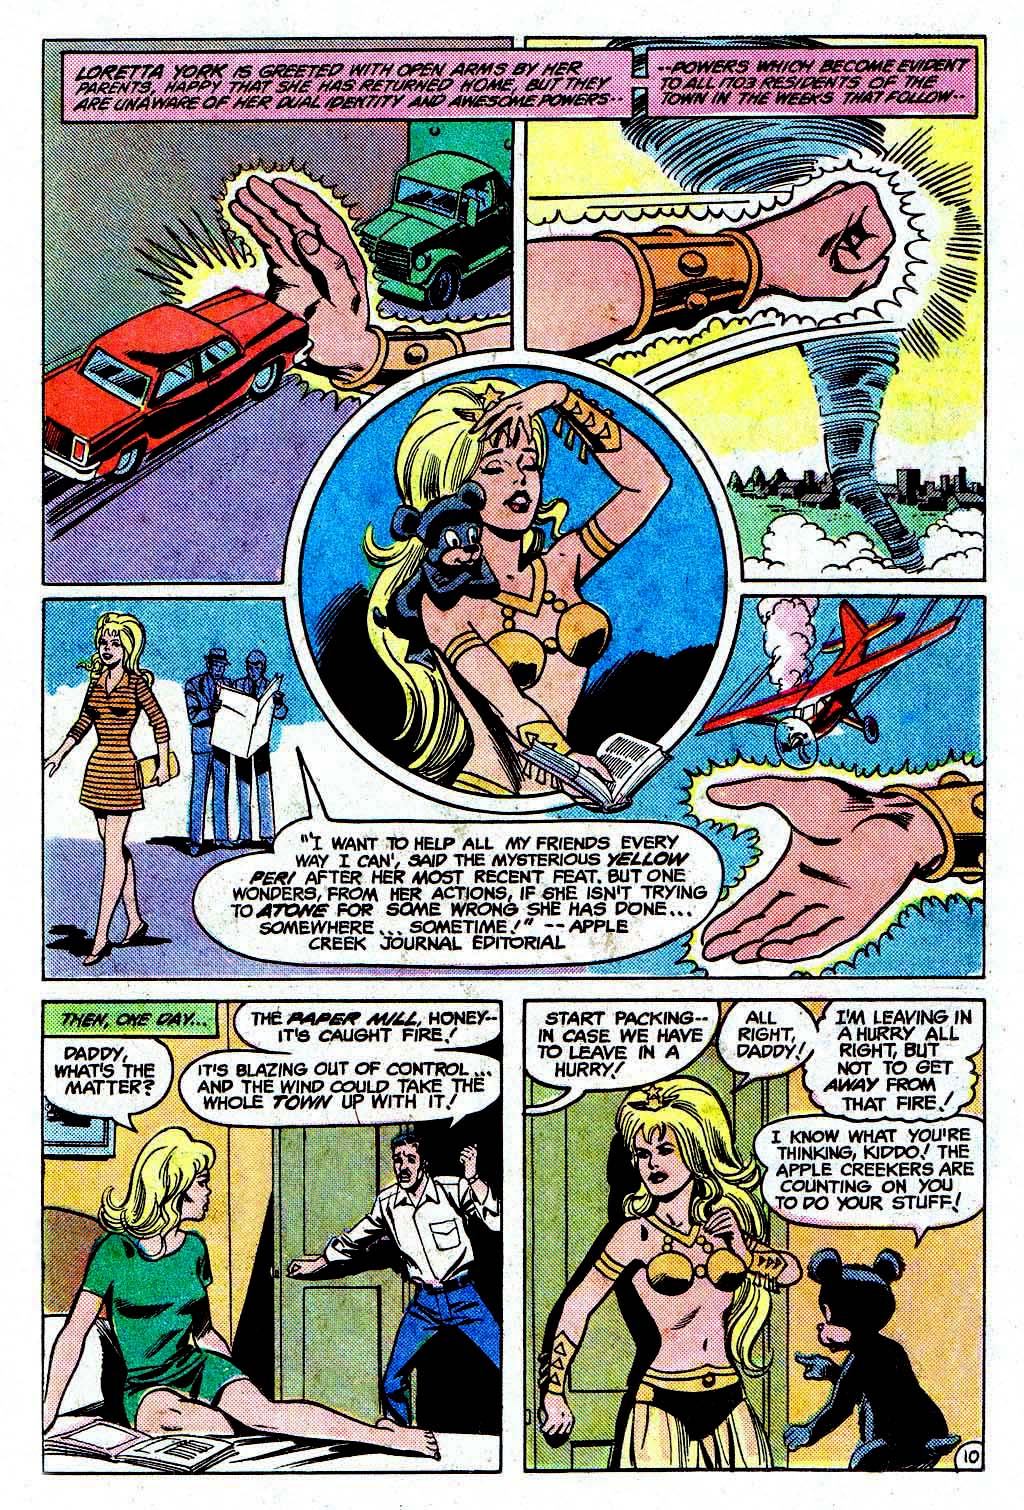 The New Adventures of Superboy 35 Page 14